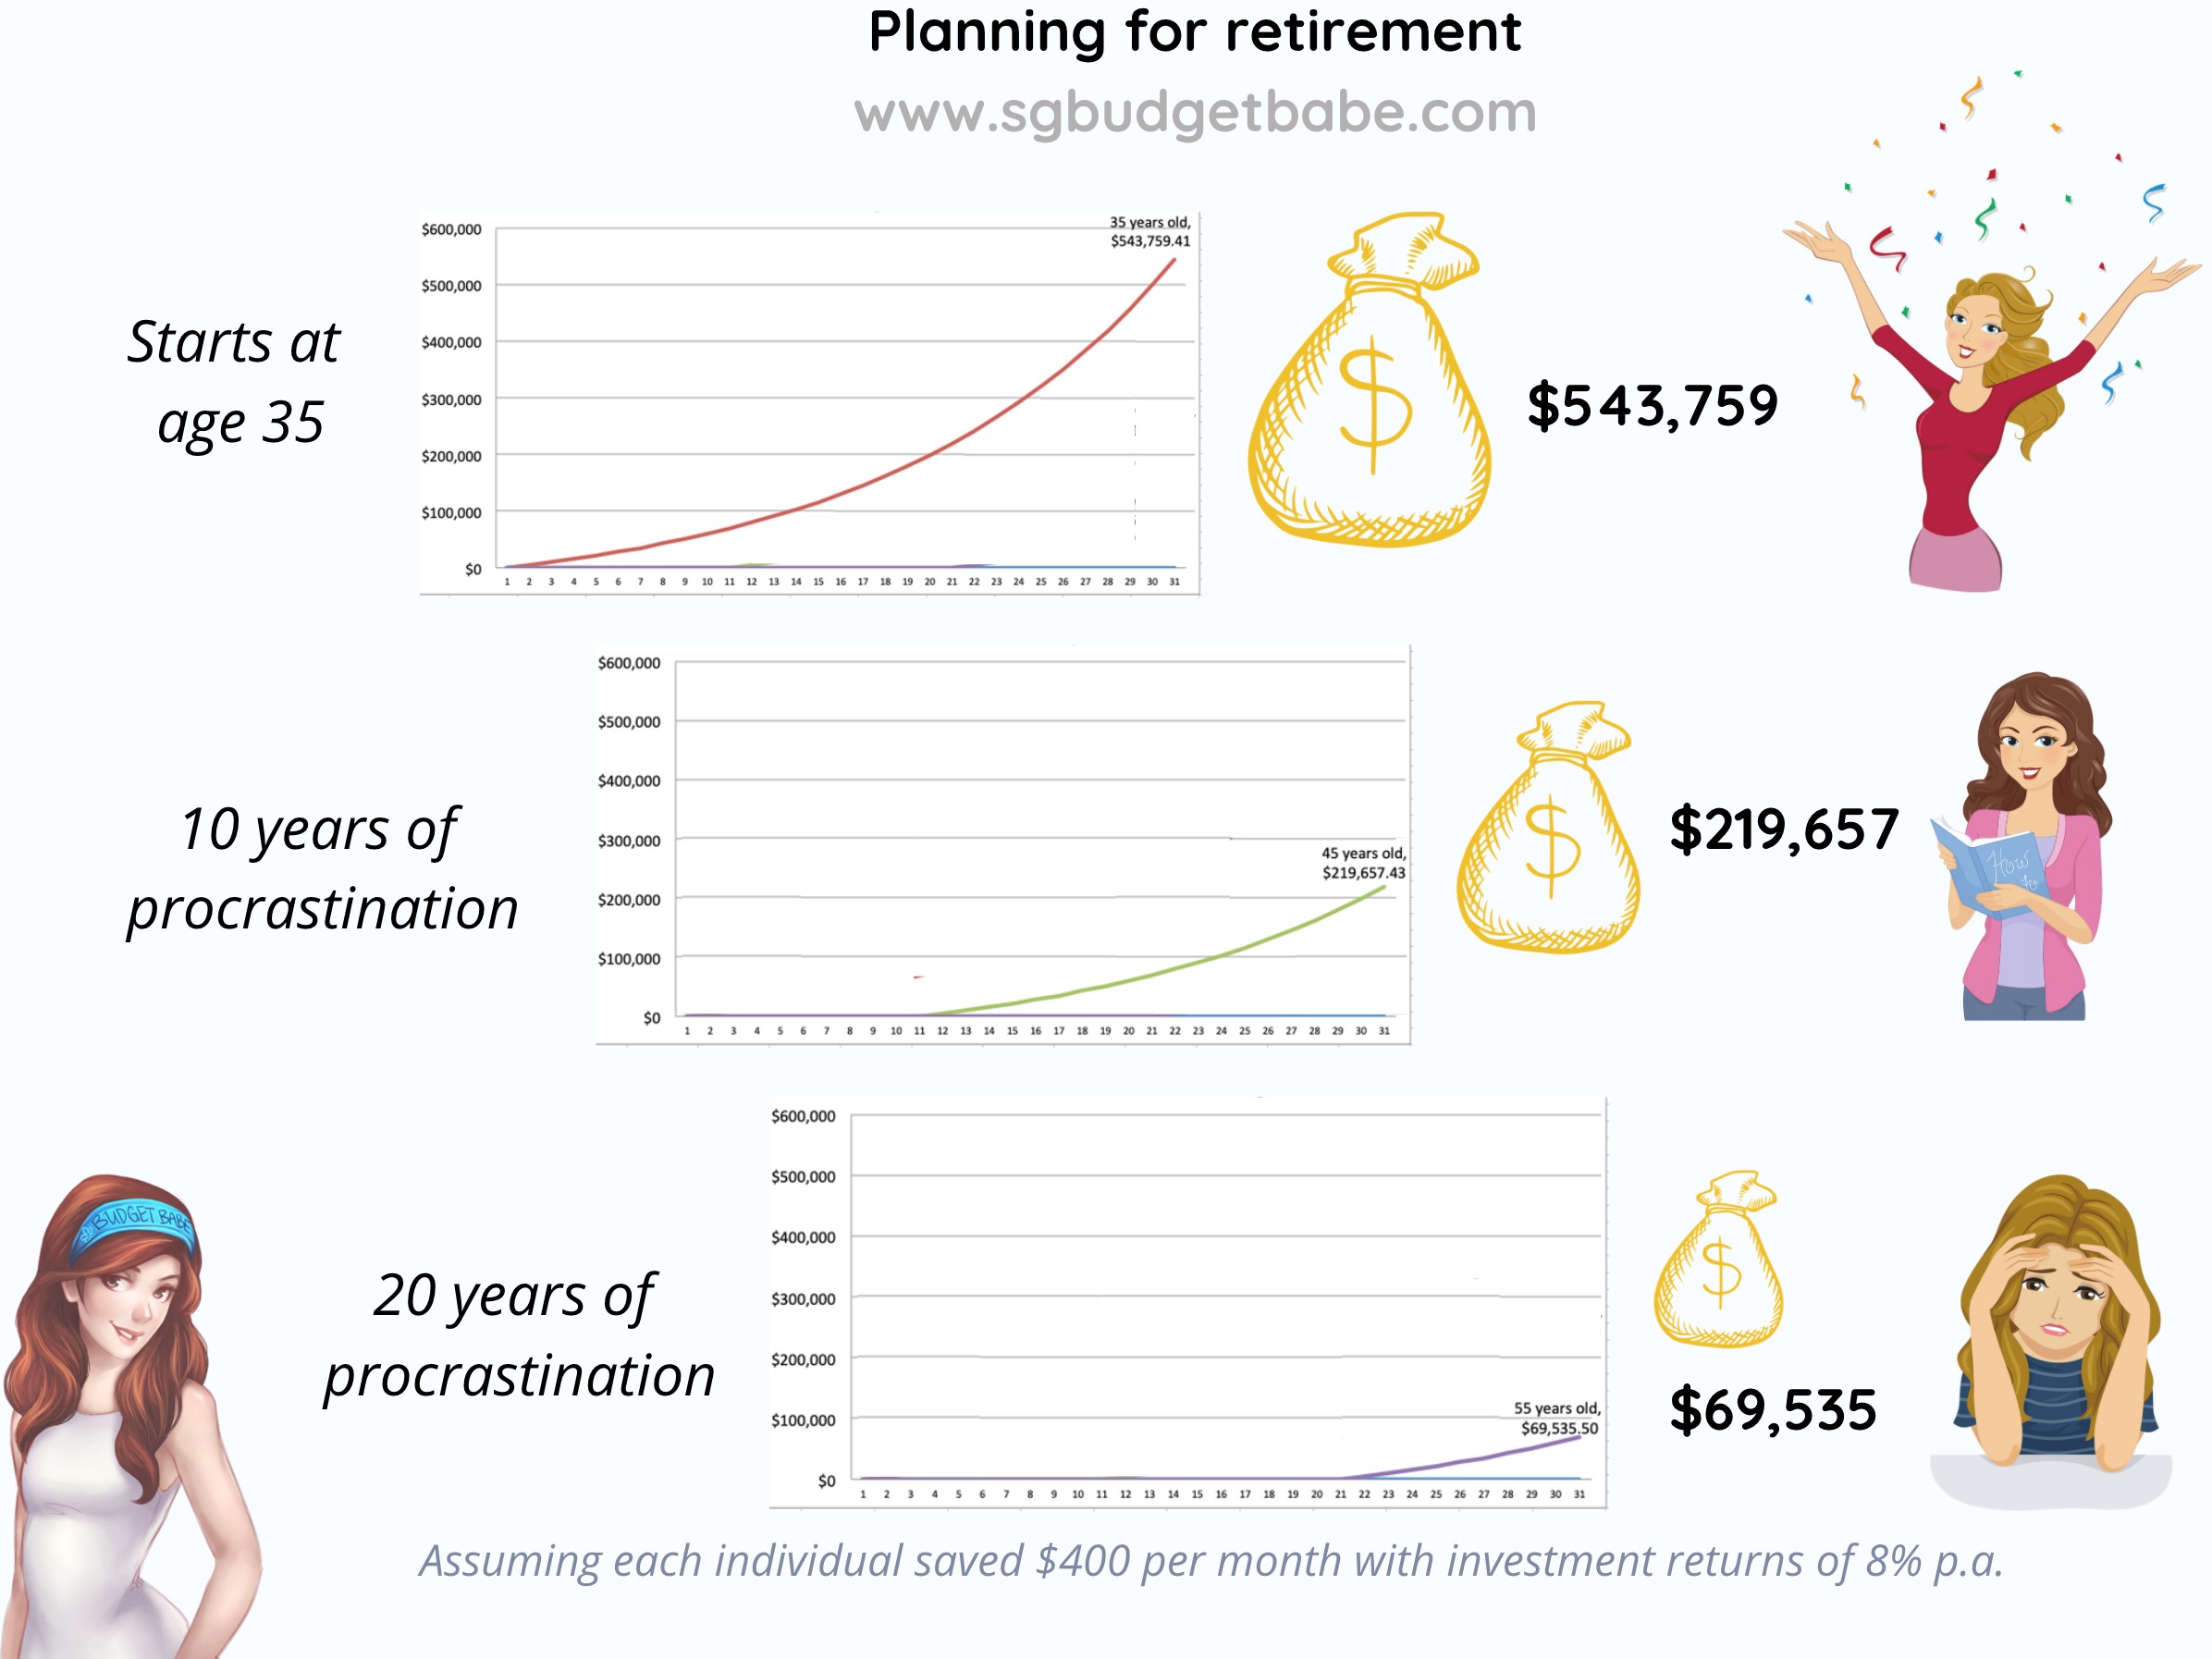 sgbudgetbabe-infographic-planning-for-retirement